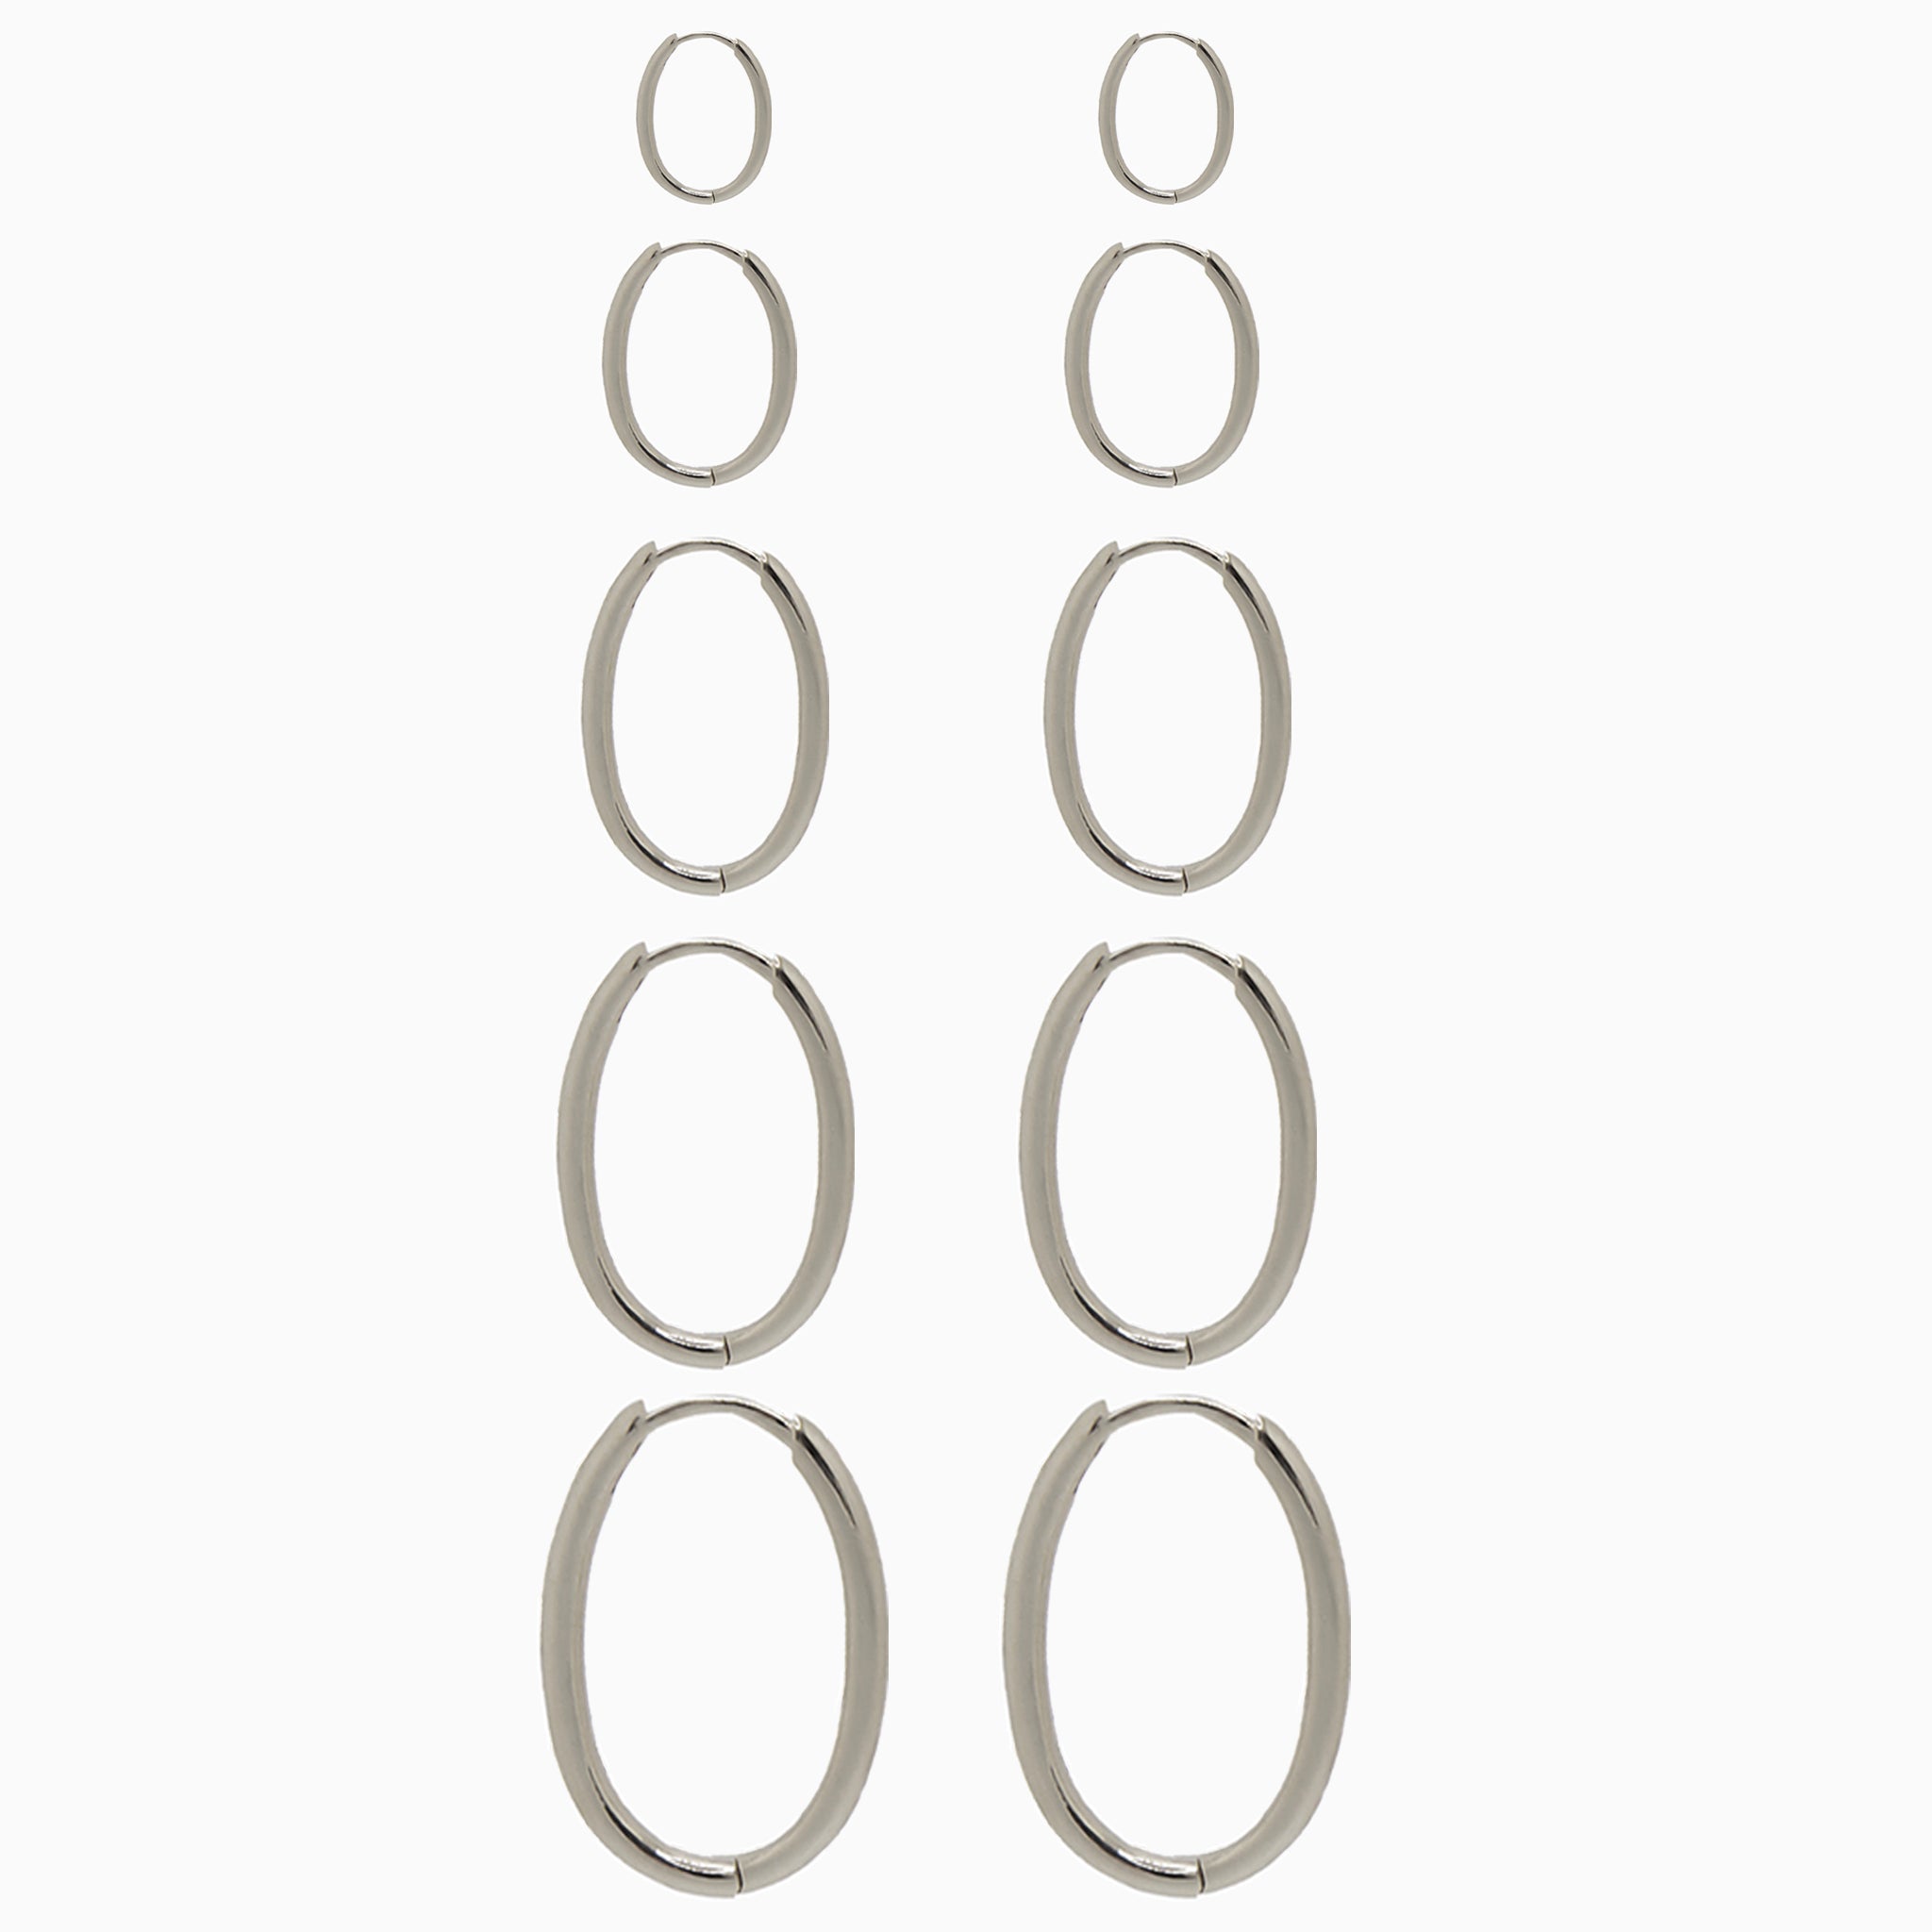 14k White Gold Hinged Everyday Oval Hoop Earrings, Size Run View